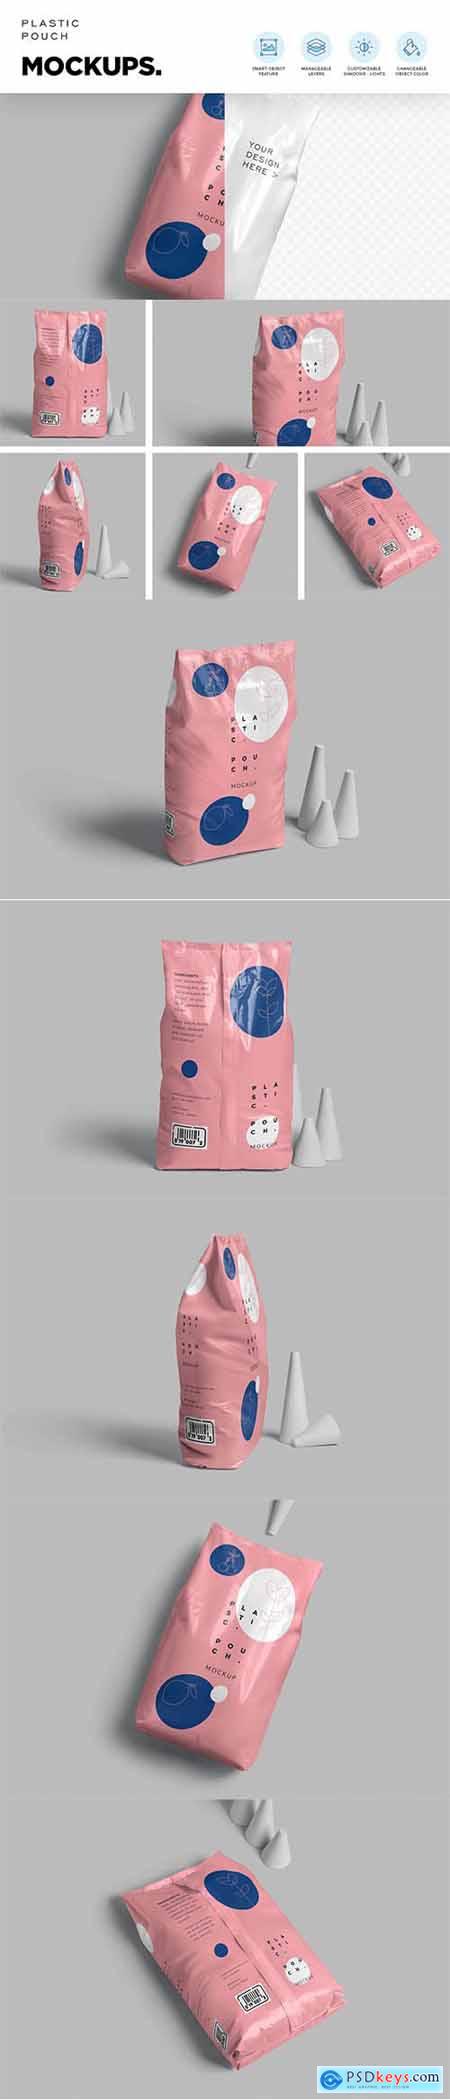 Plastic Packaging Pouch Mockups 6859933